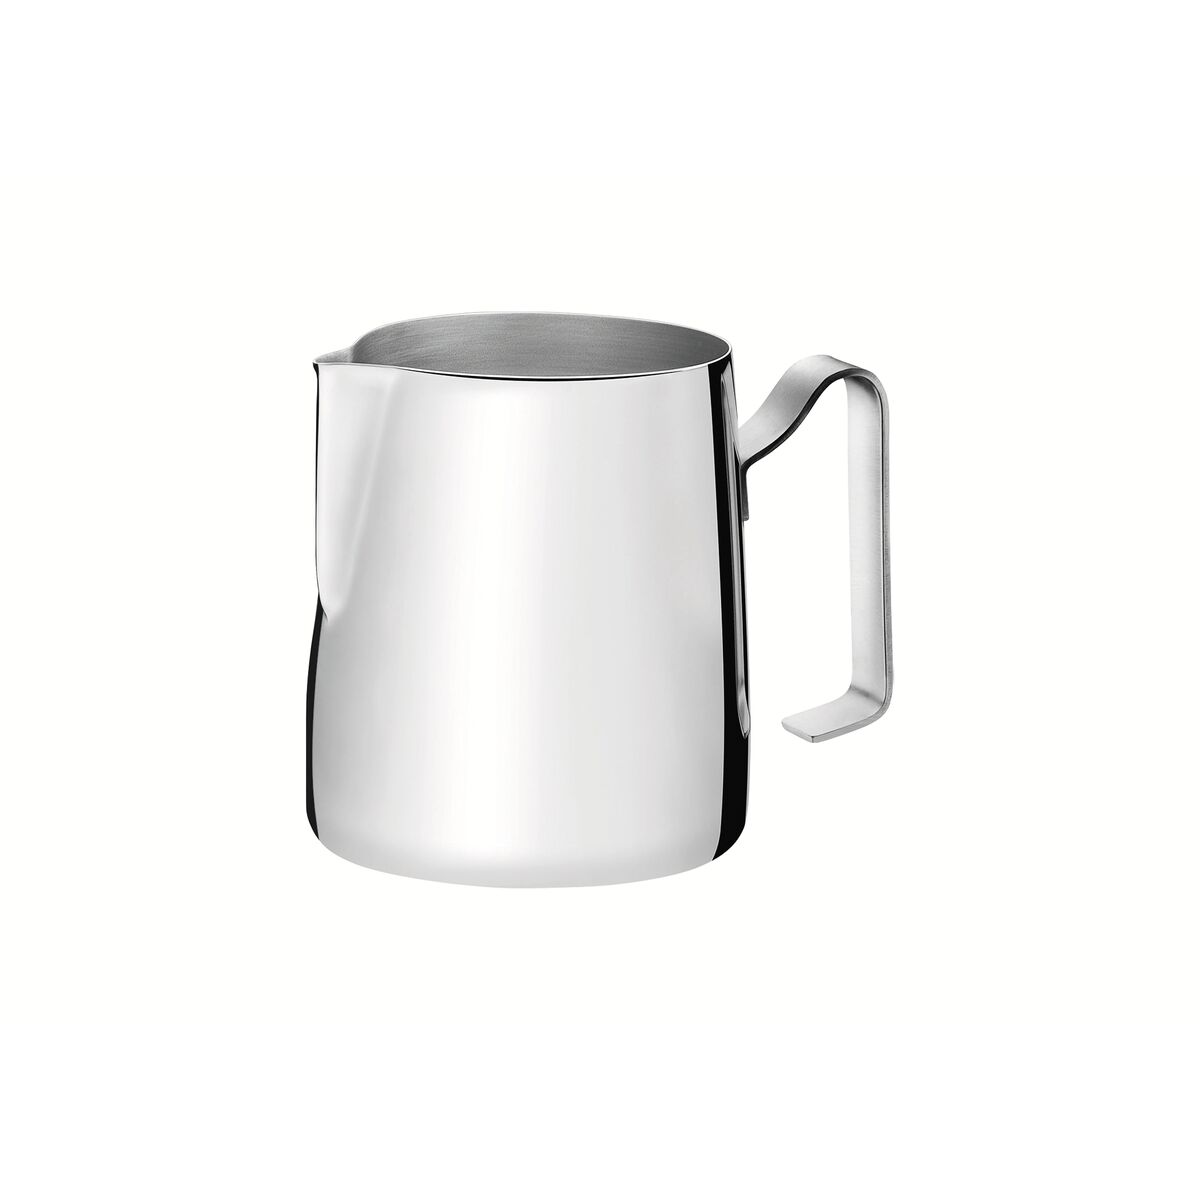 Tramontina Stainless Steel Barista Frothing Pitcher 10 cm 765 ml